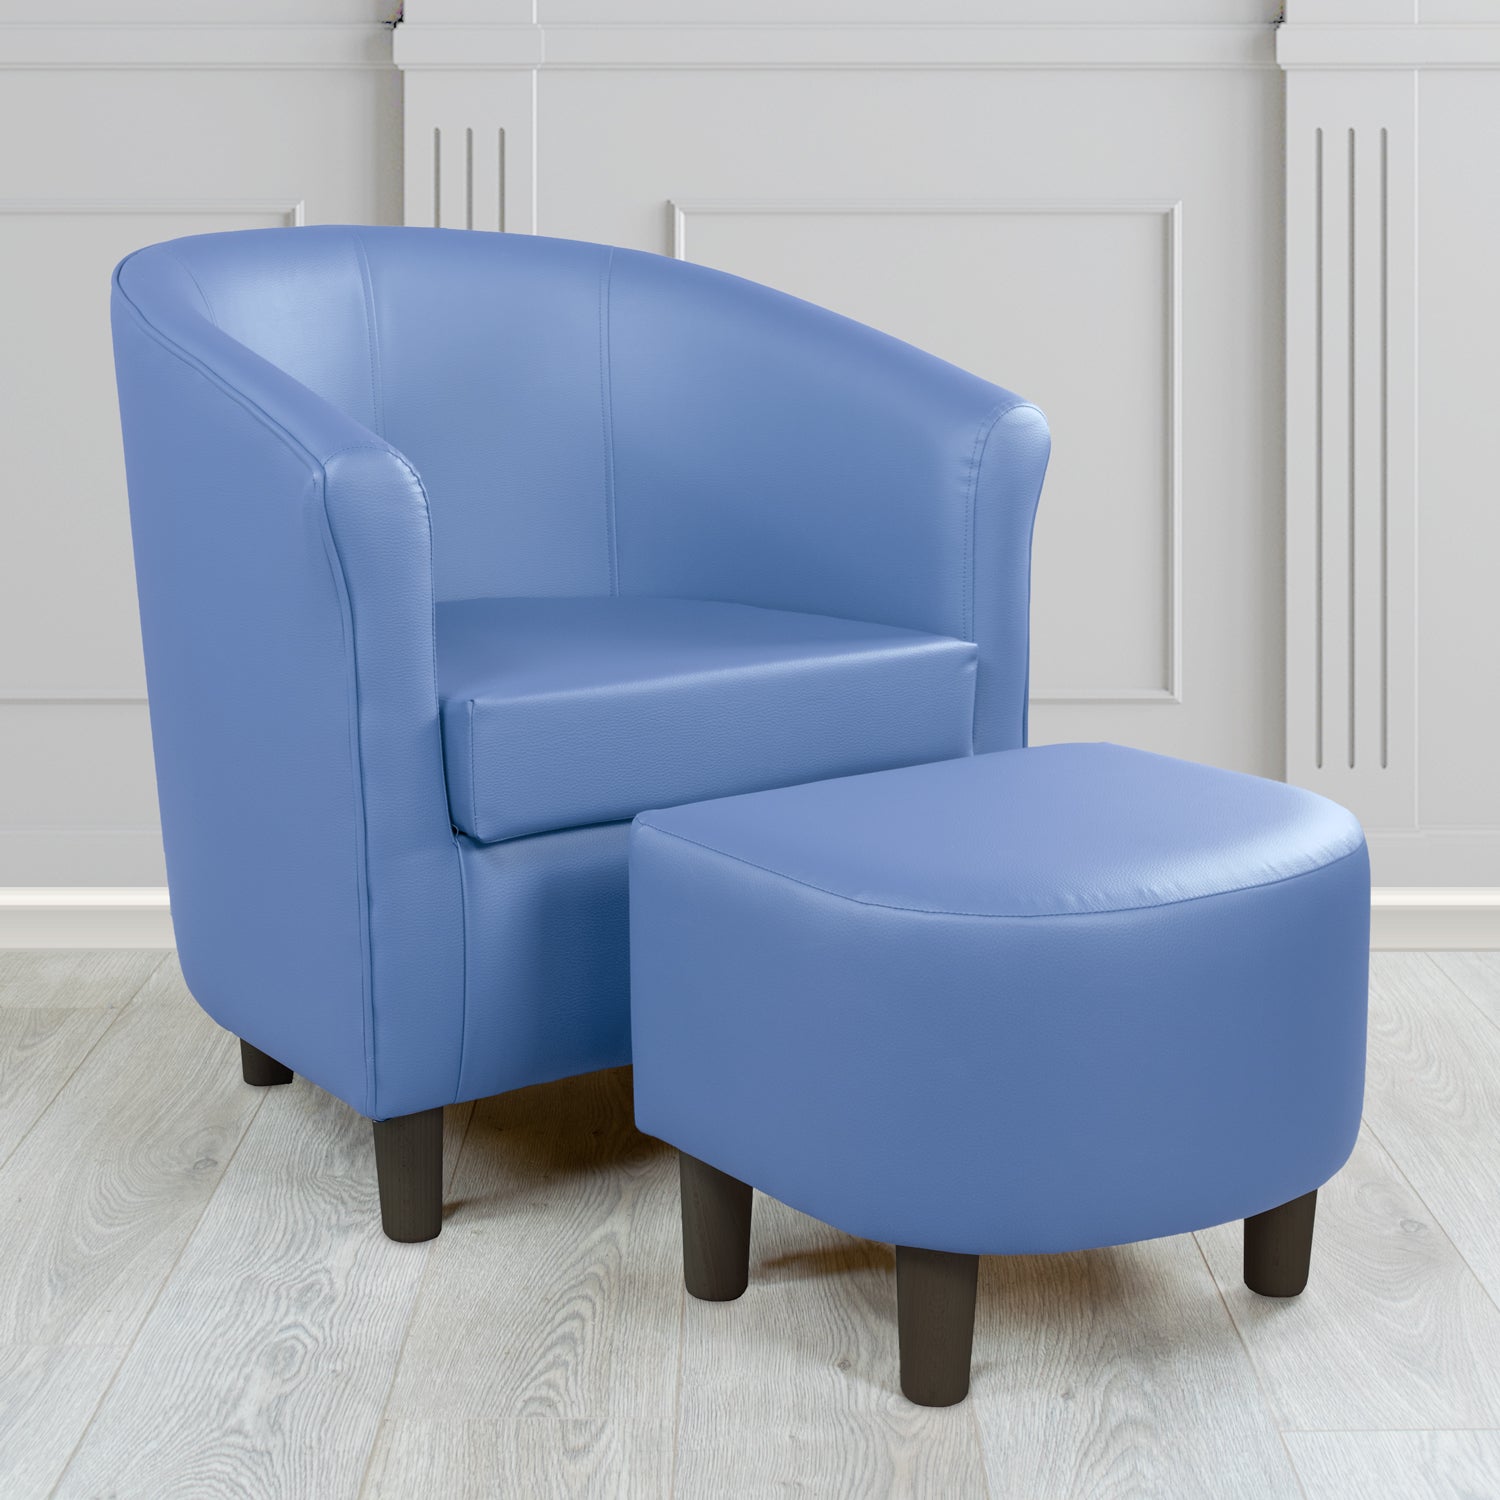 Tuscany Just Colour Blue Steel Faux Leather Tub Chair with Dee Footstool Set - The Tub Chair Shop